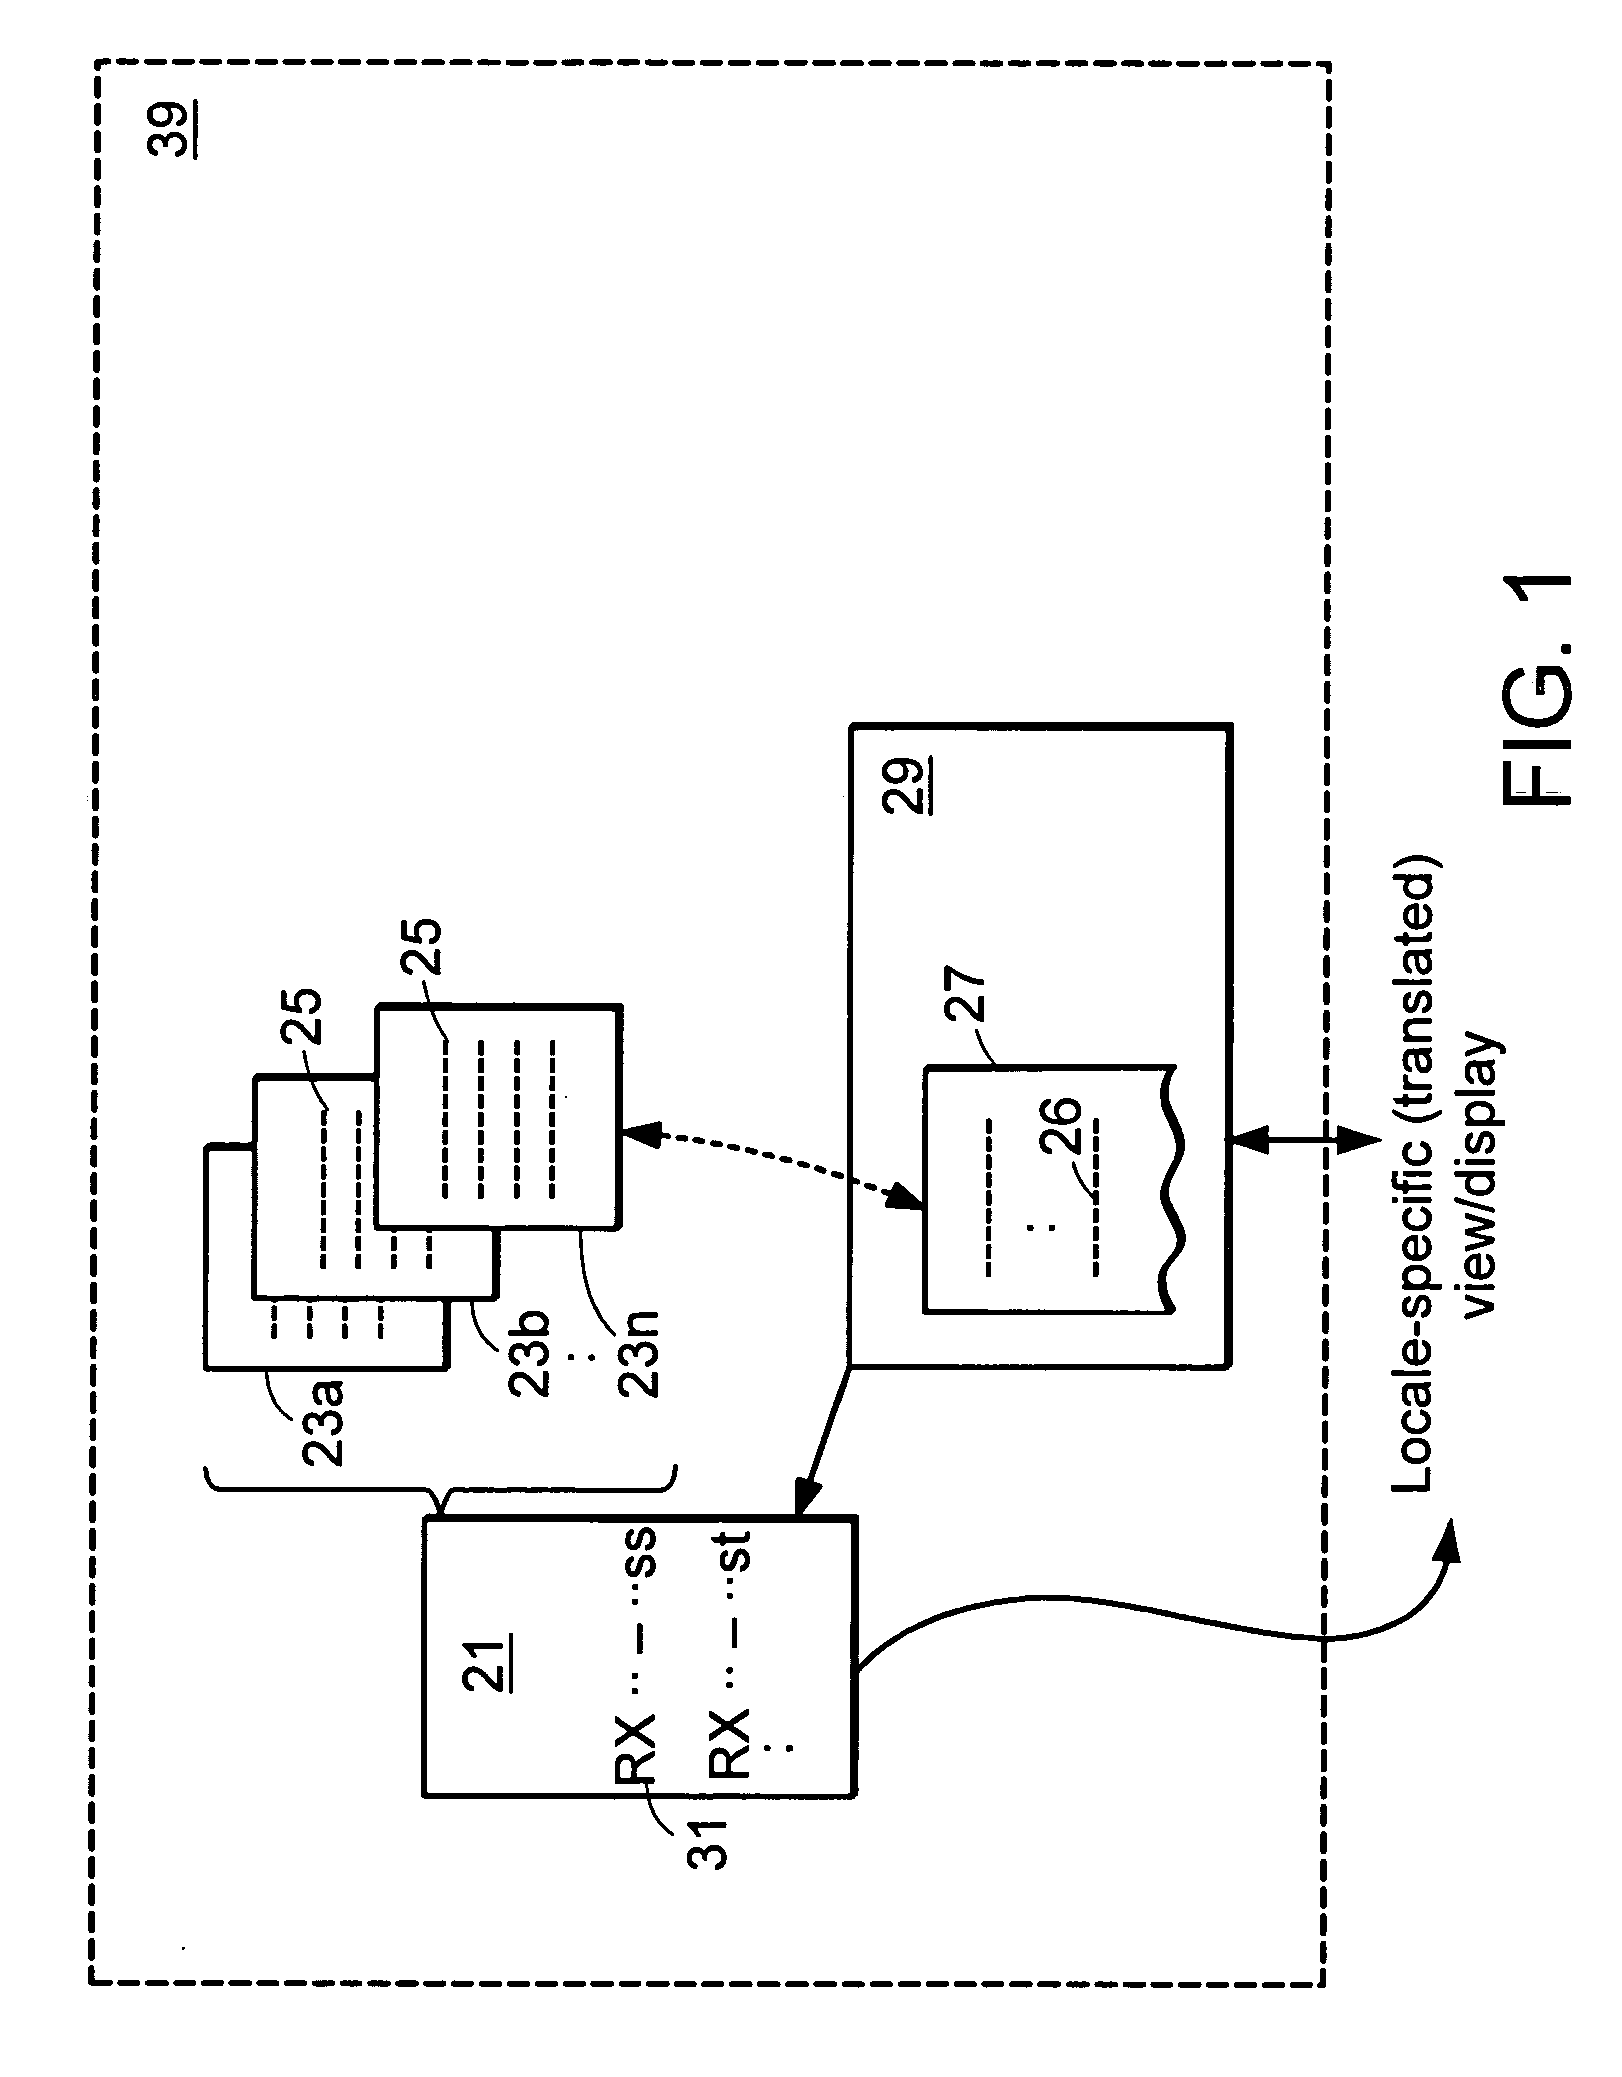 Automated multilingual software testing method and apparatus